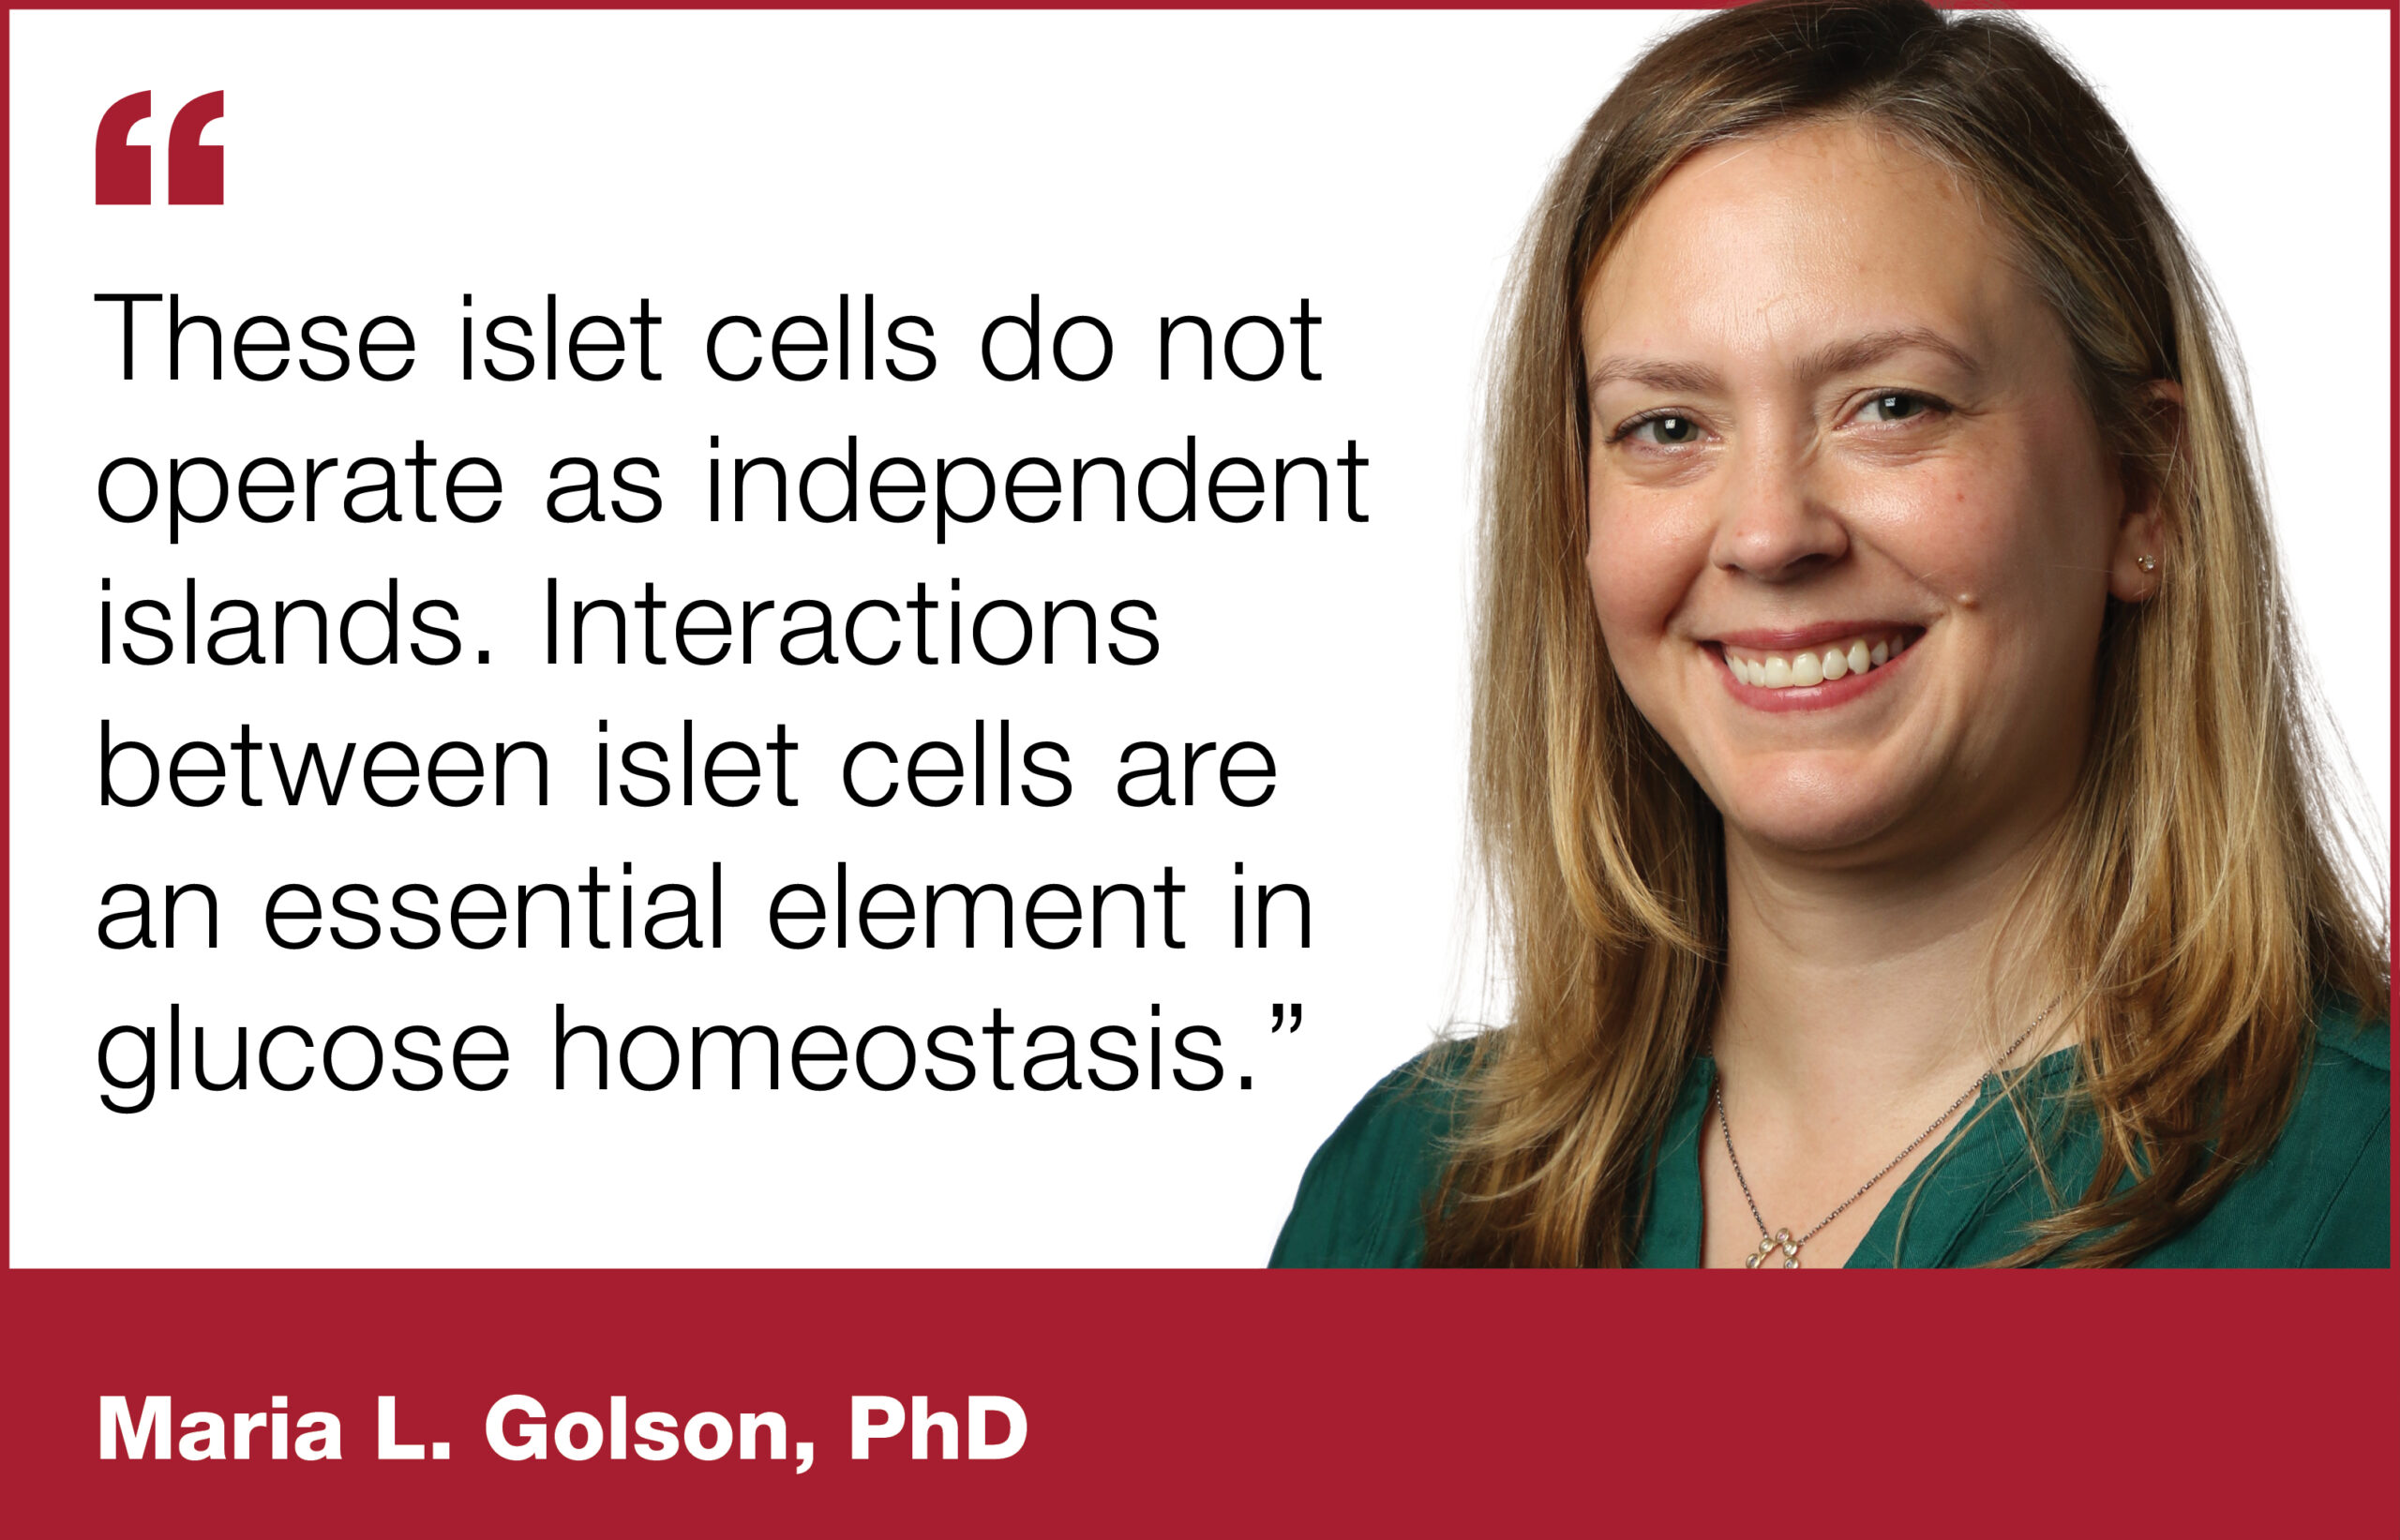 Investigators share new findings in islet cell interactions